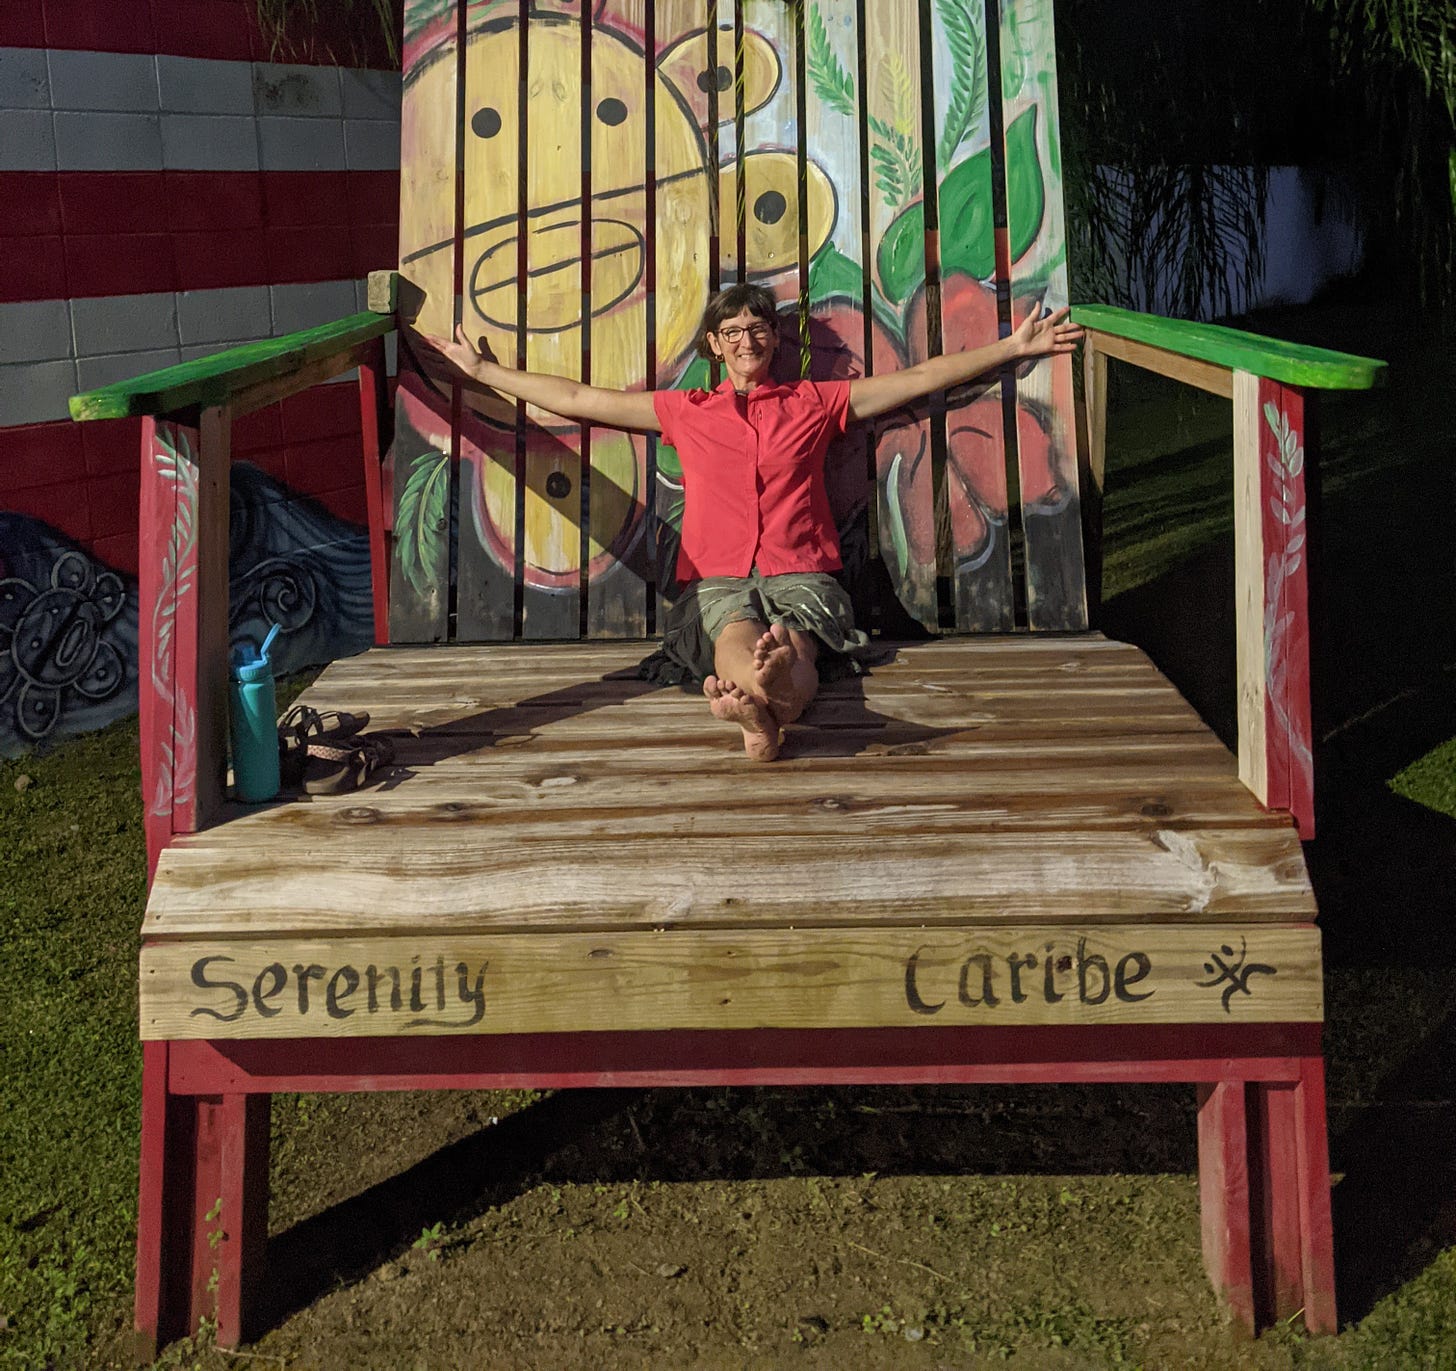 picture of me sitting in an enormous wooden beach chair, with my arms spread from side to side, still not wide enough for me to reach the armrests, and my legs straight out in front of me, nowhere near the end of the seat.